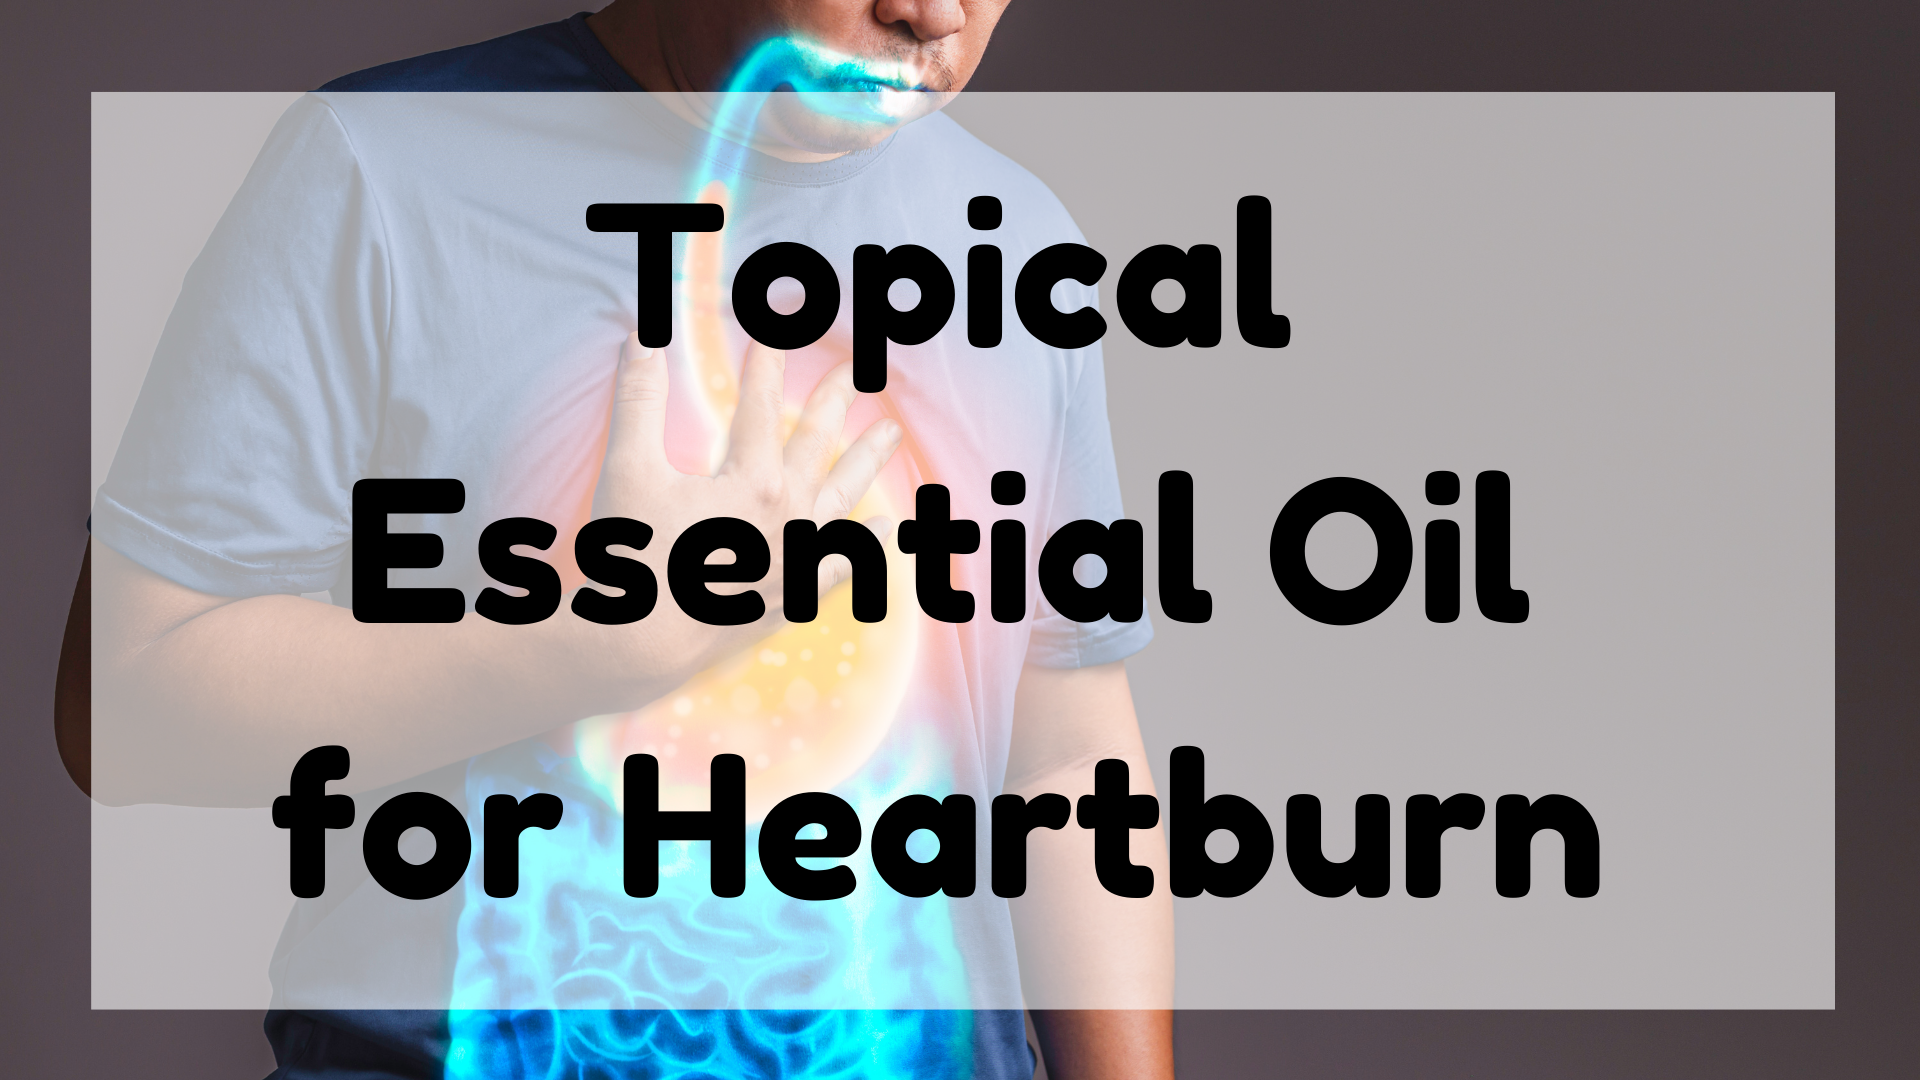 Topical Essential Oil for Heartburn featured image